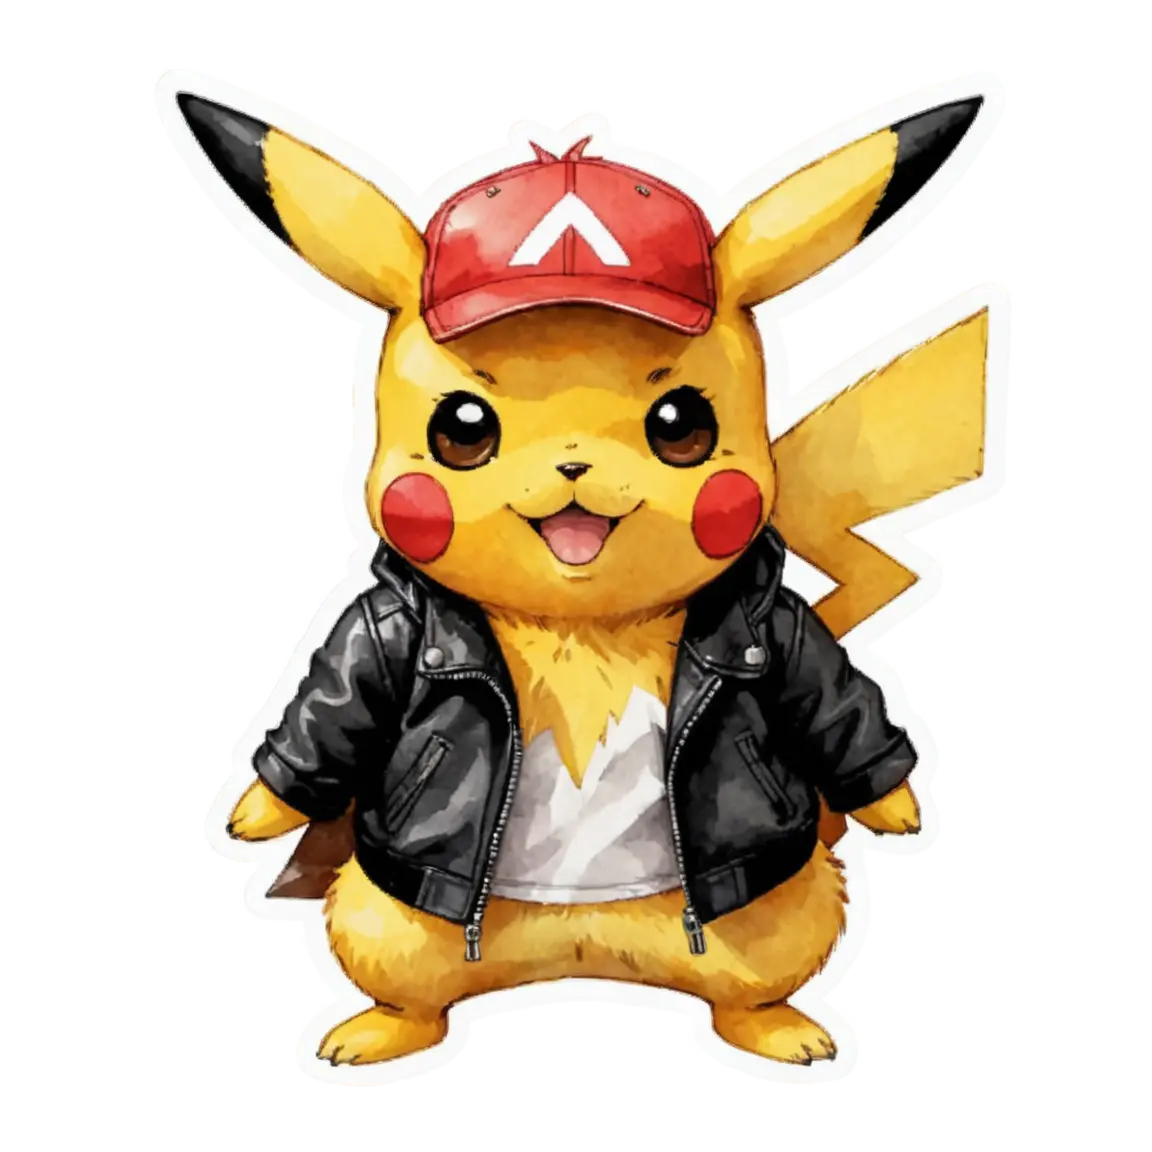 a cool looking pikachu wearing black leather jacket, watercolor painting style